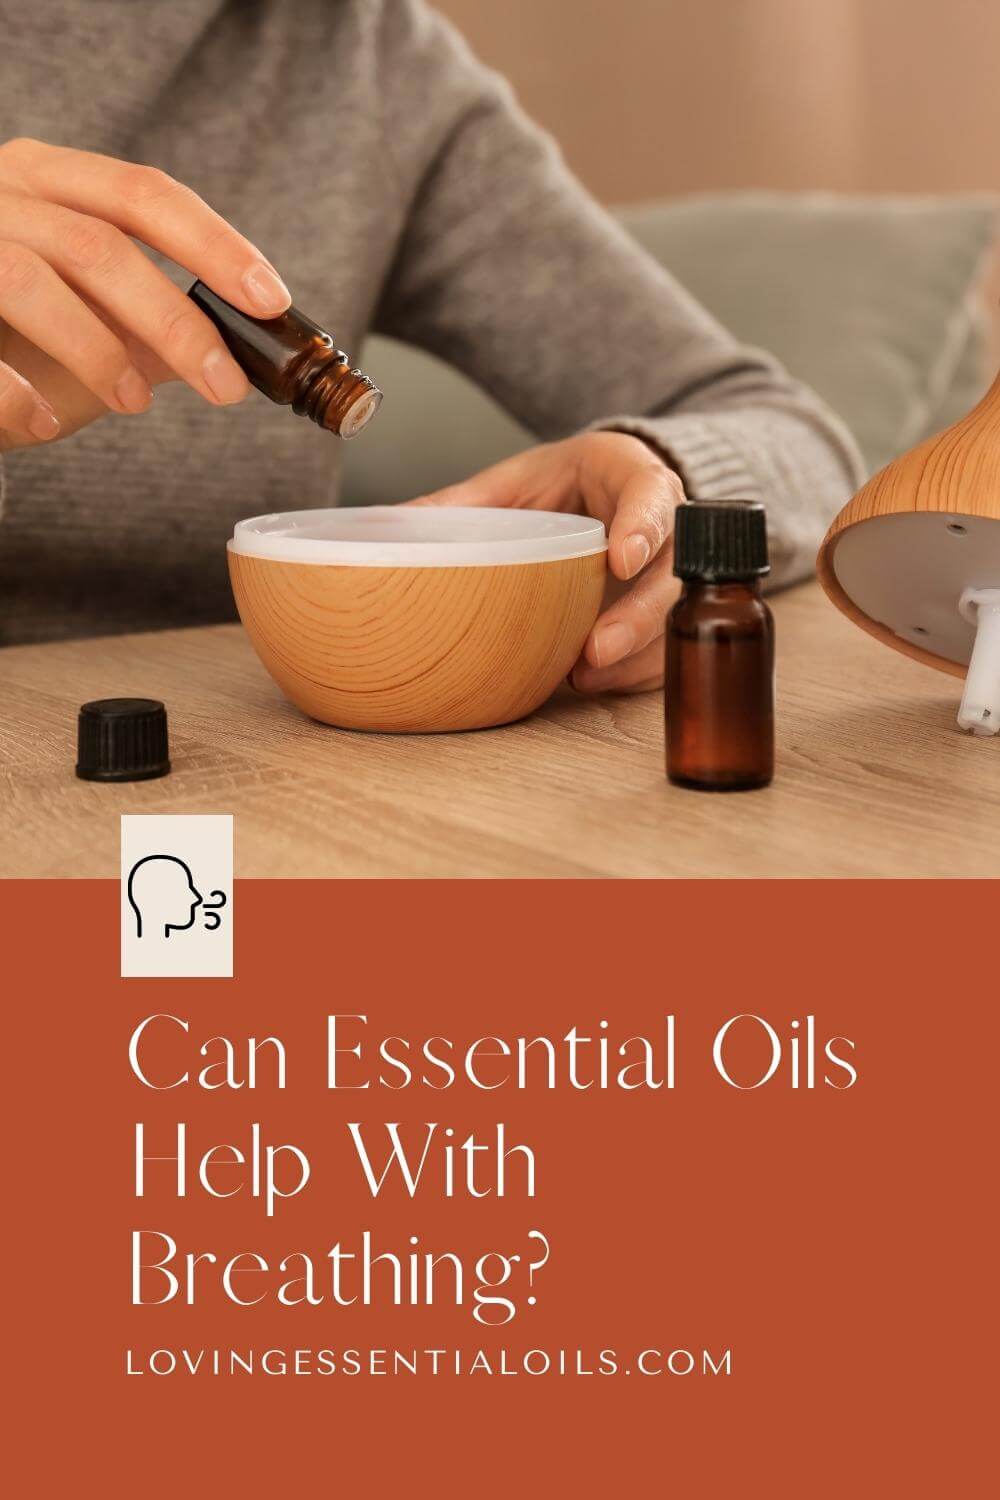 Essential Oils for Breathing by Loving Essential Oils